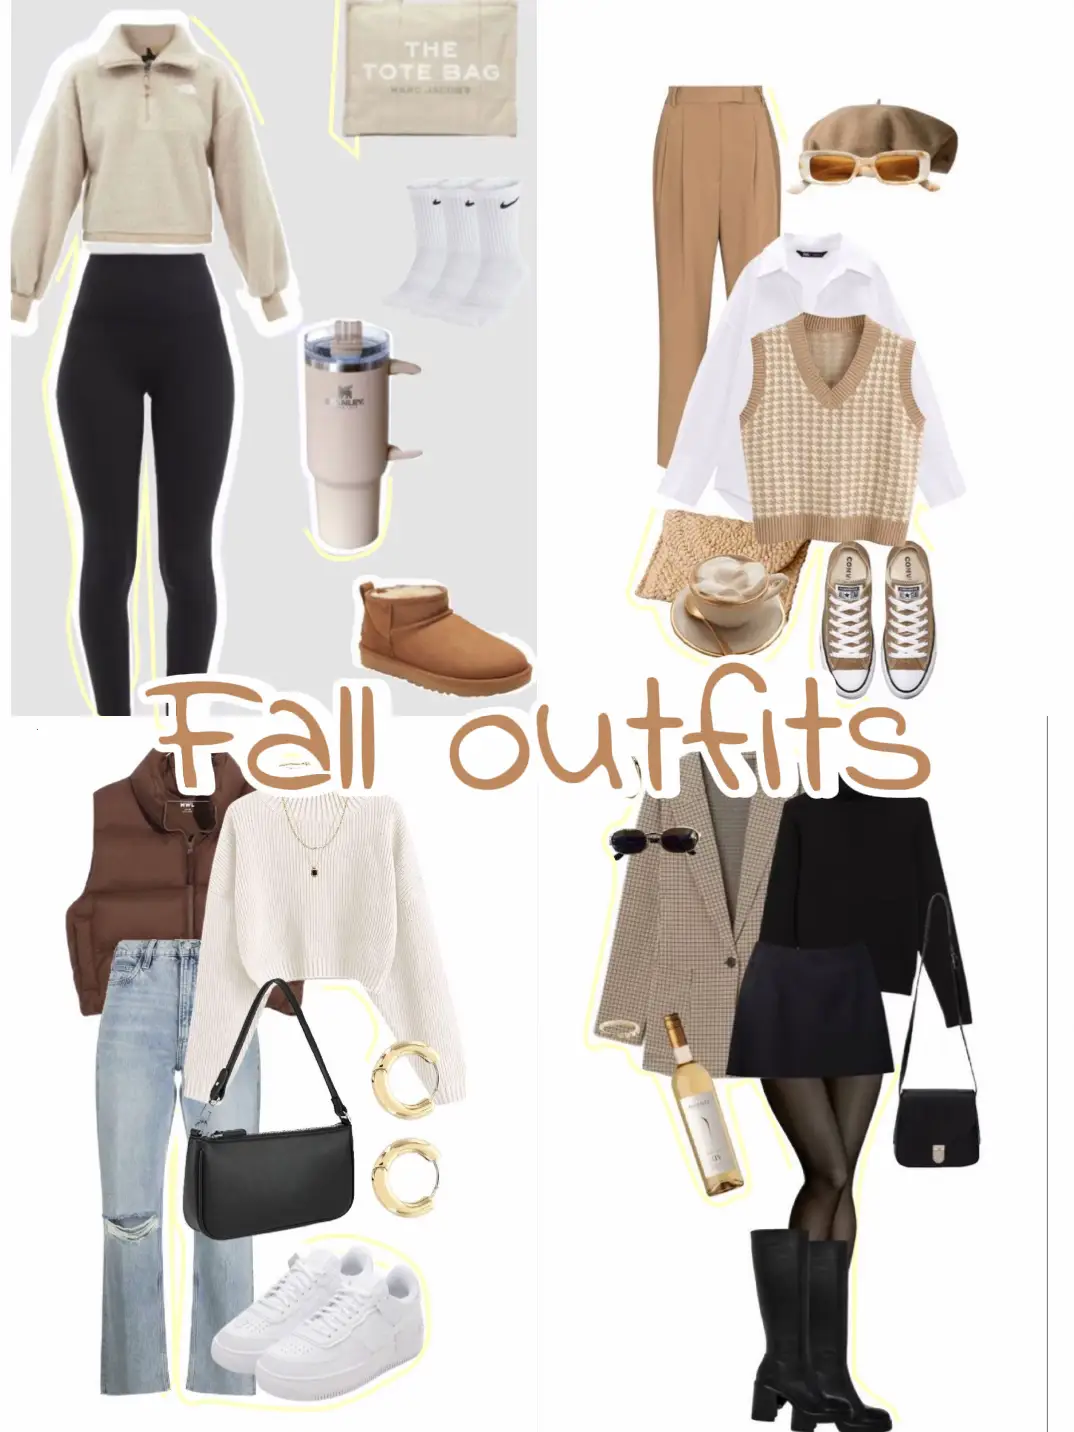 Fall Outfit Pinspiration: Checked Shirt, Cargo Vest, Colored Leggings - The  Budget Babe